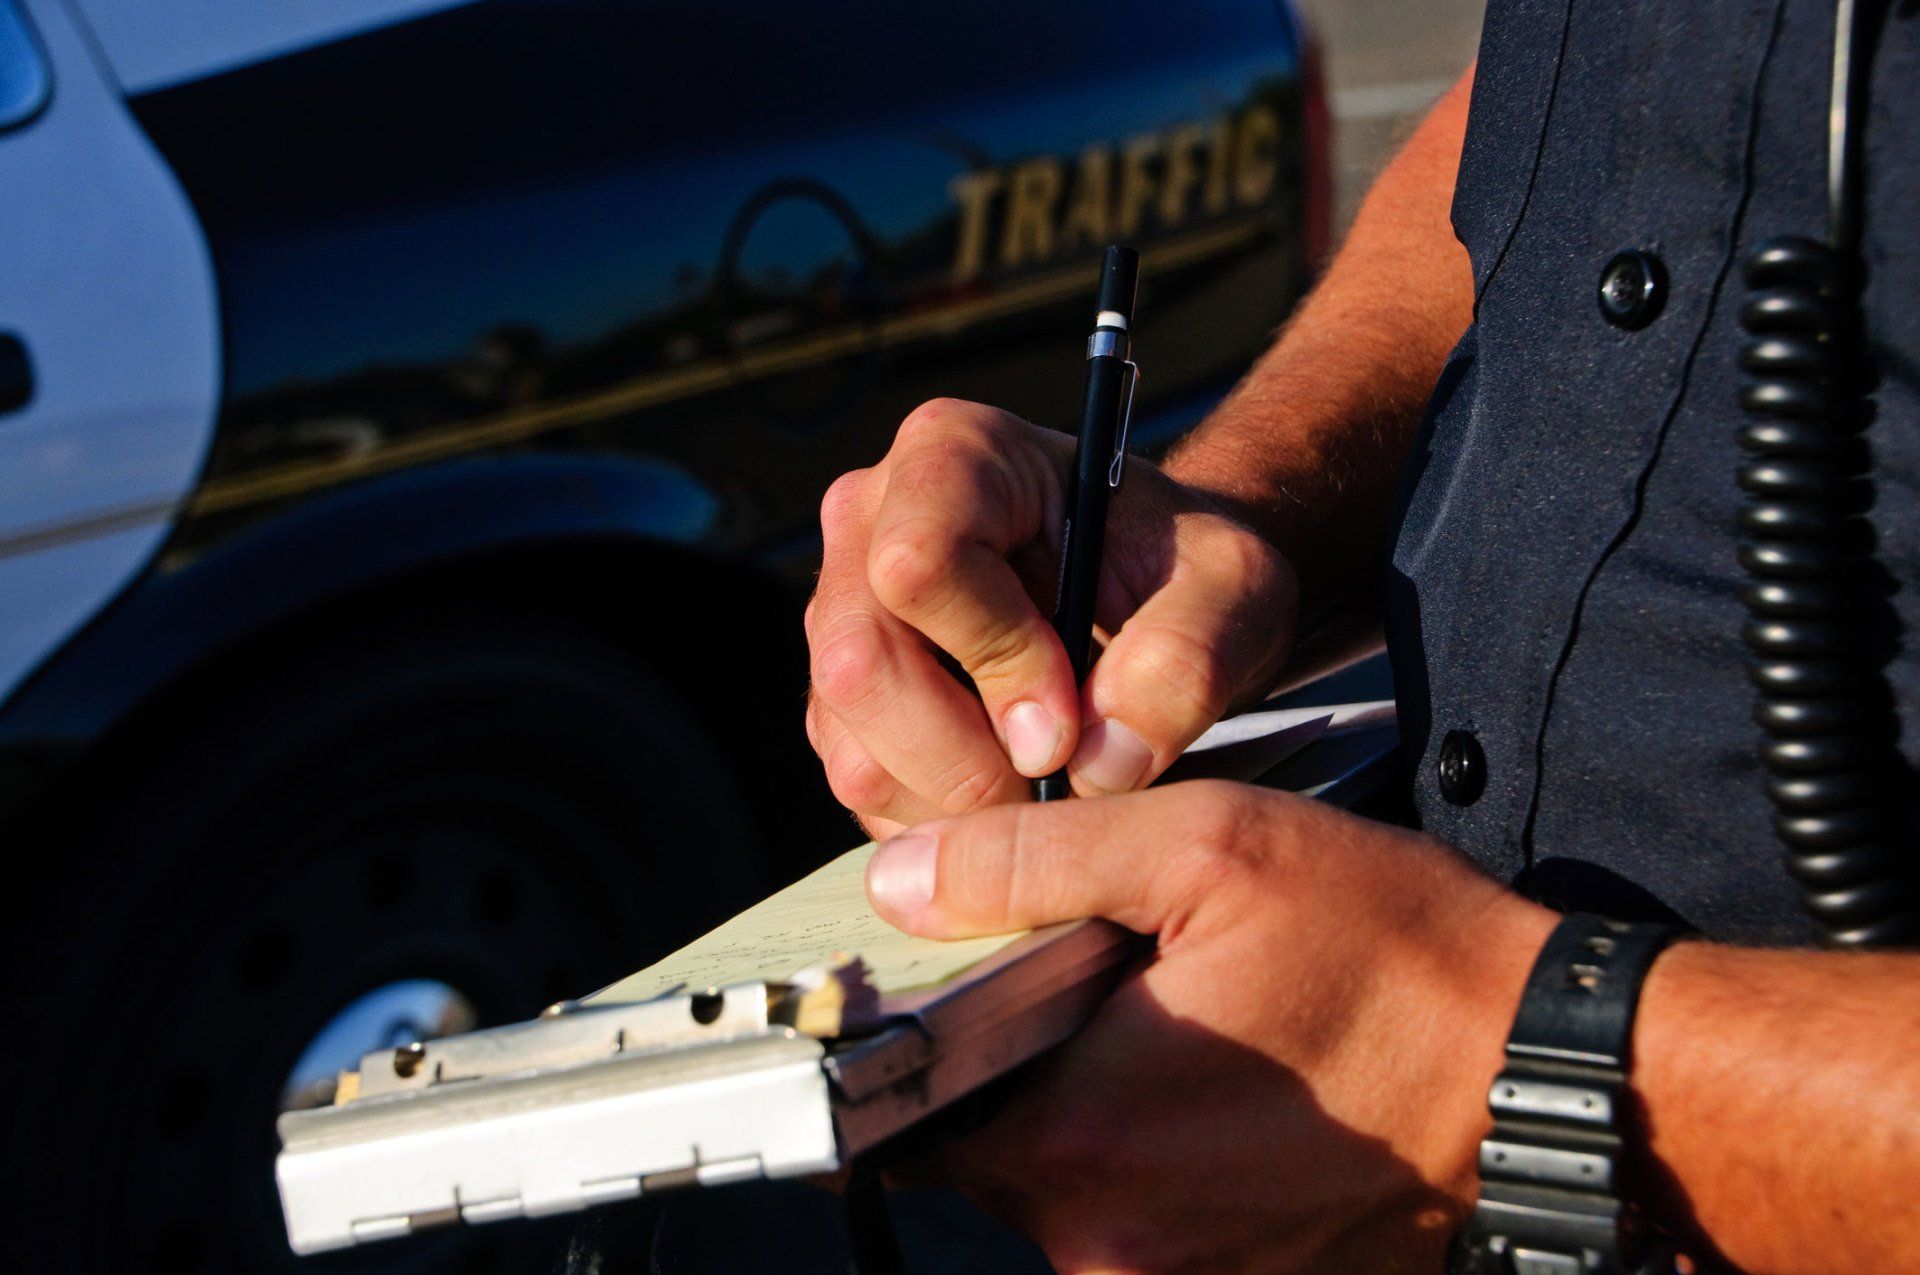 Traffic Tickets - A Police Officer Writing A Ticket in Belvidere, NJ